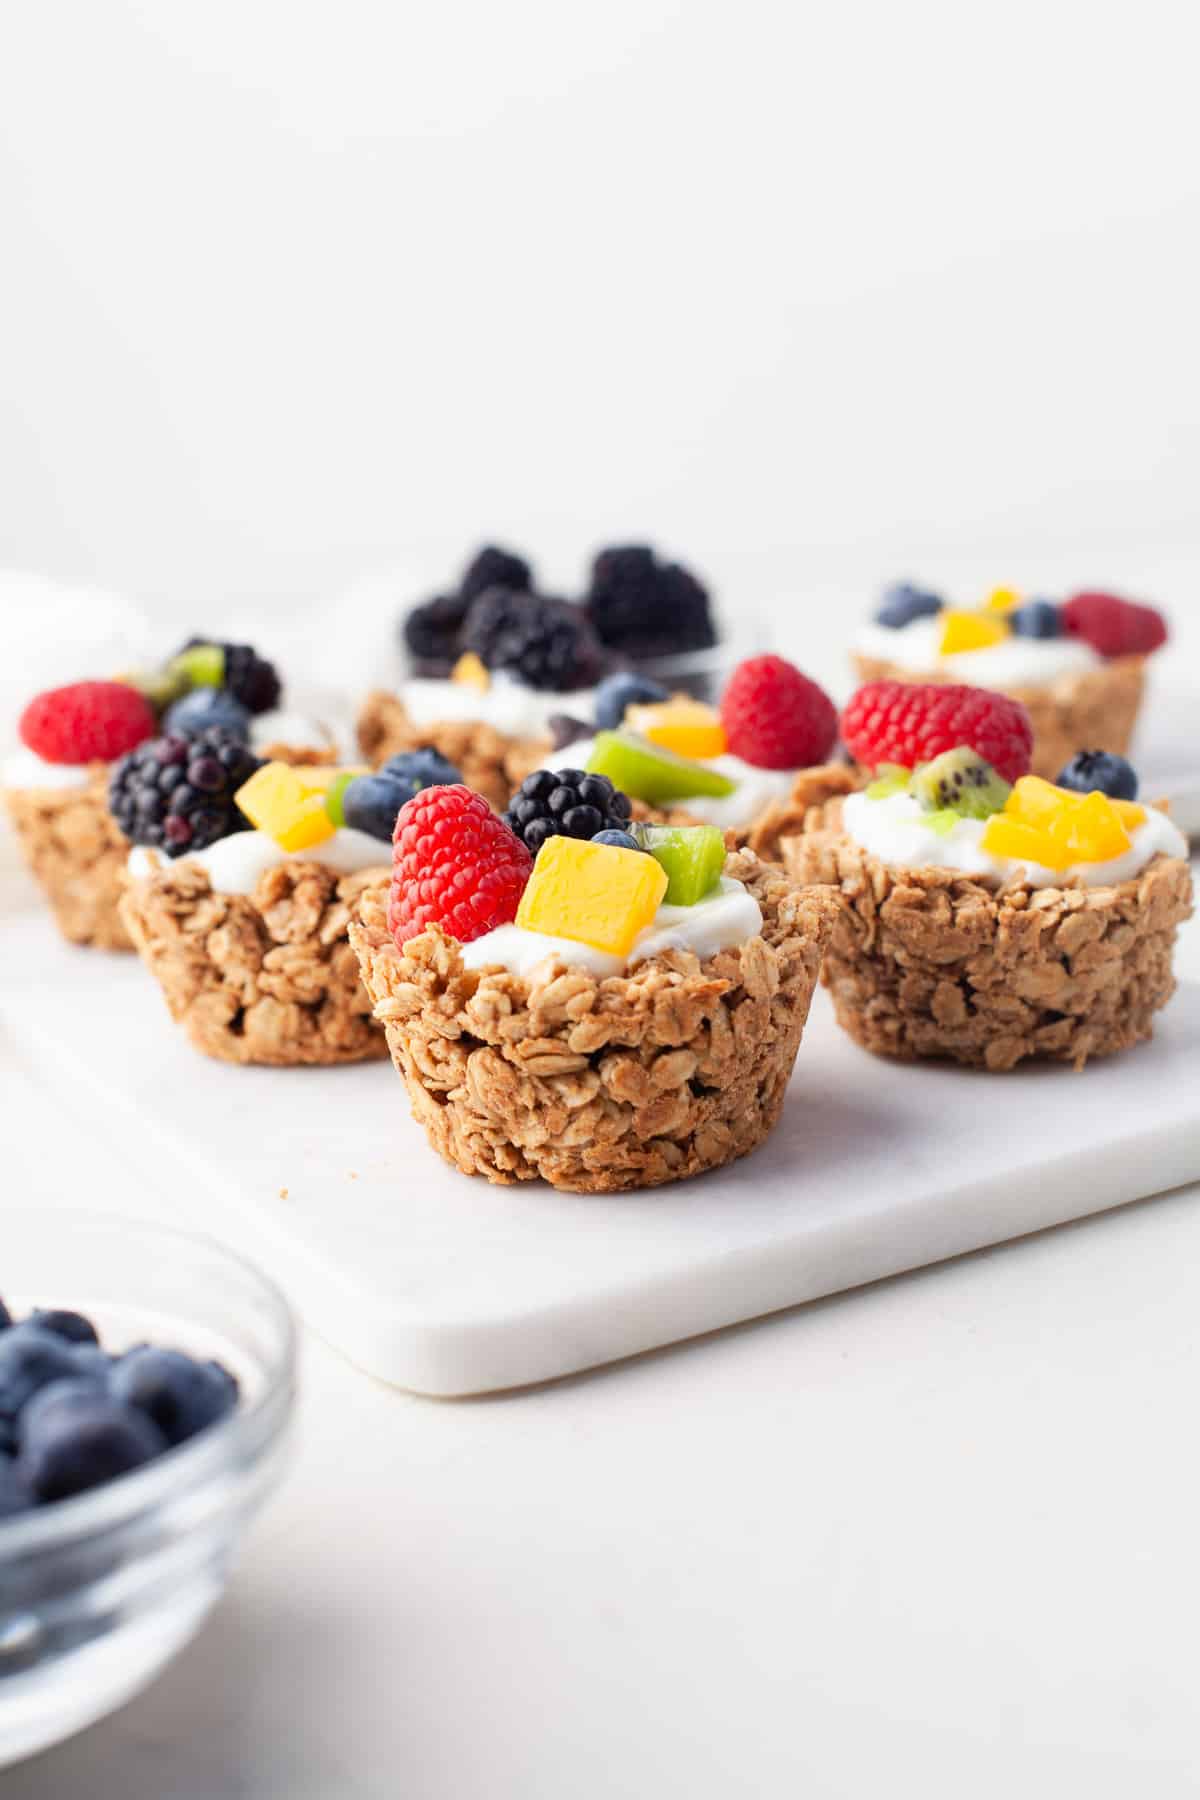 Oatmeal cups with fruit, on a white surface.